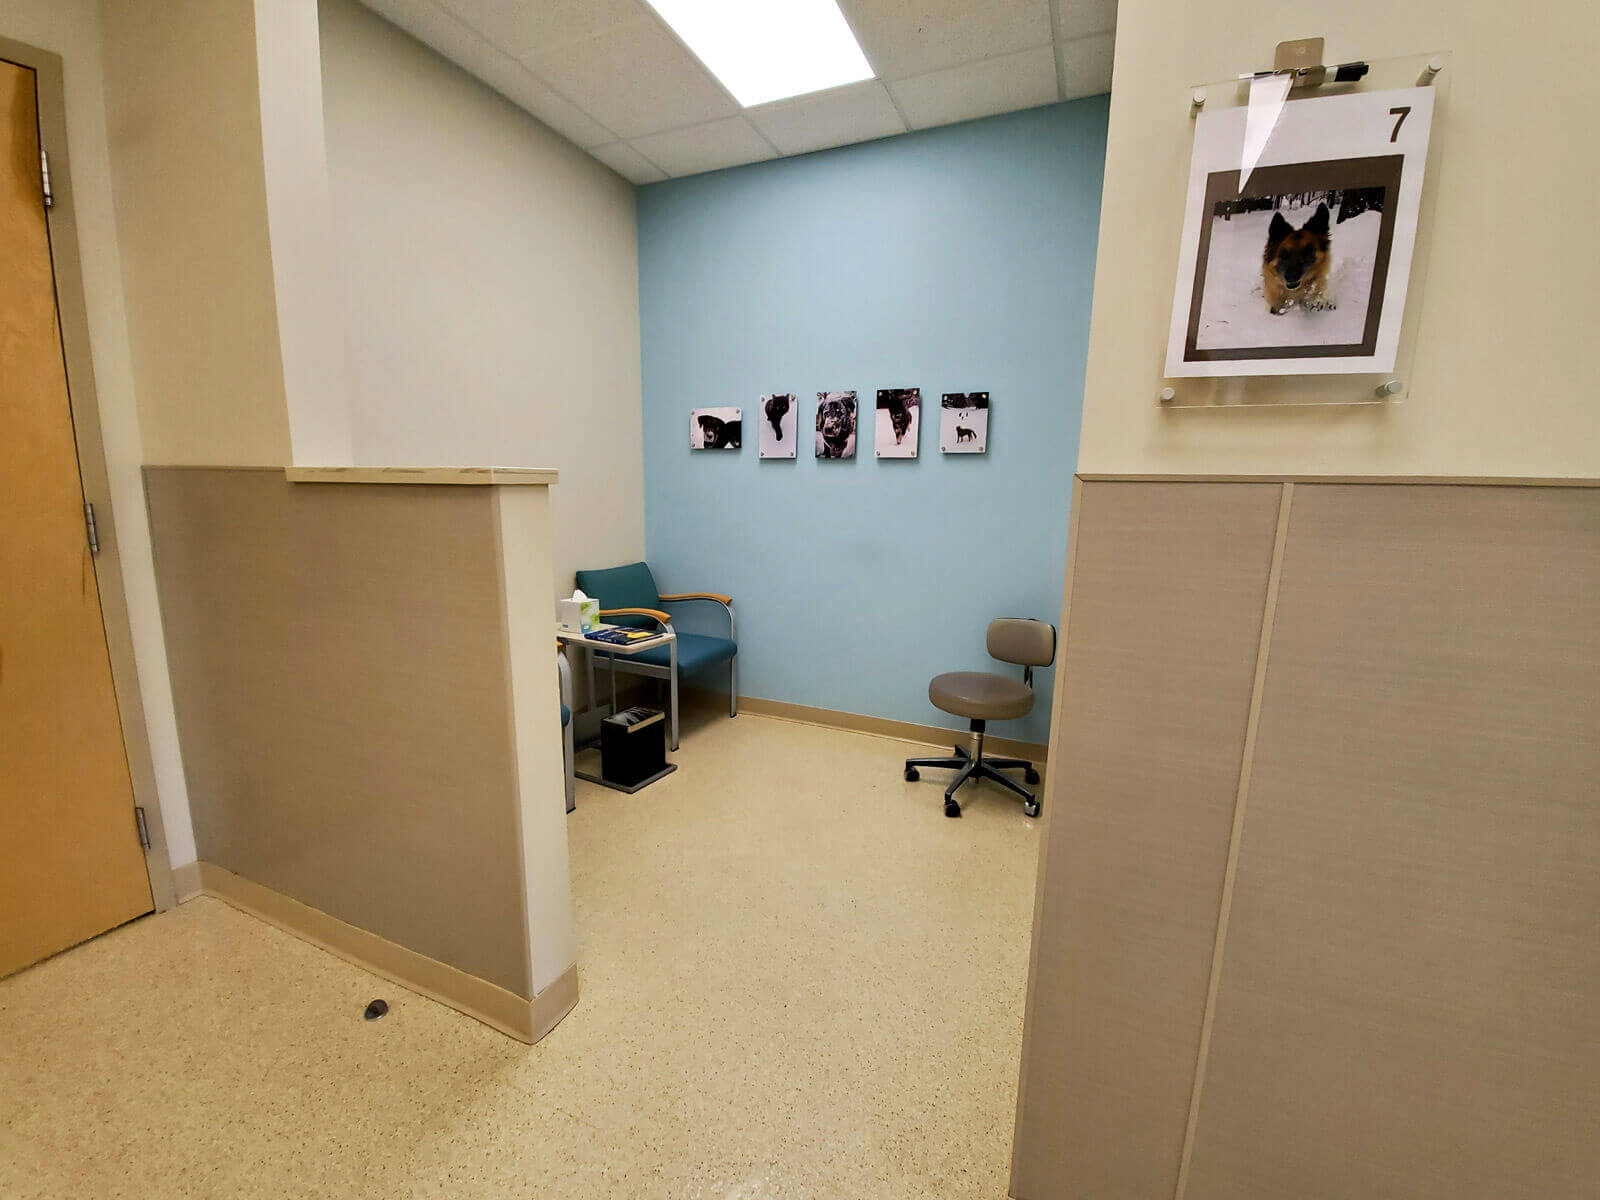 Our SCVIM nooks create a place for our team to quickly meet or discharge patients